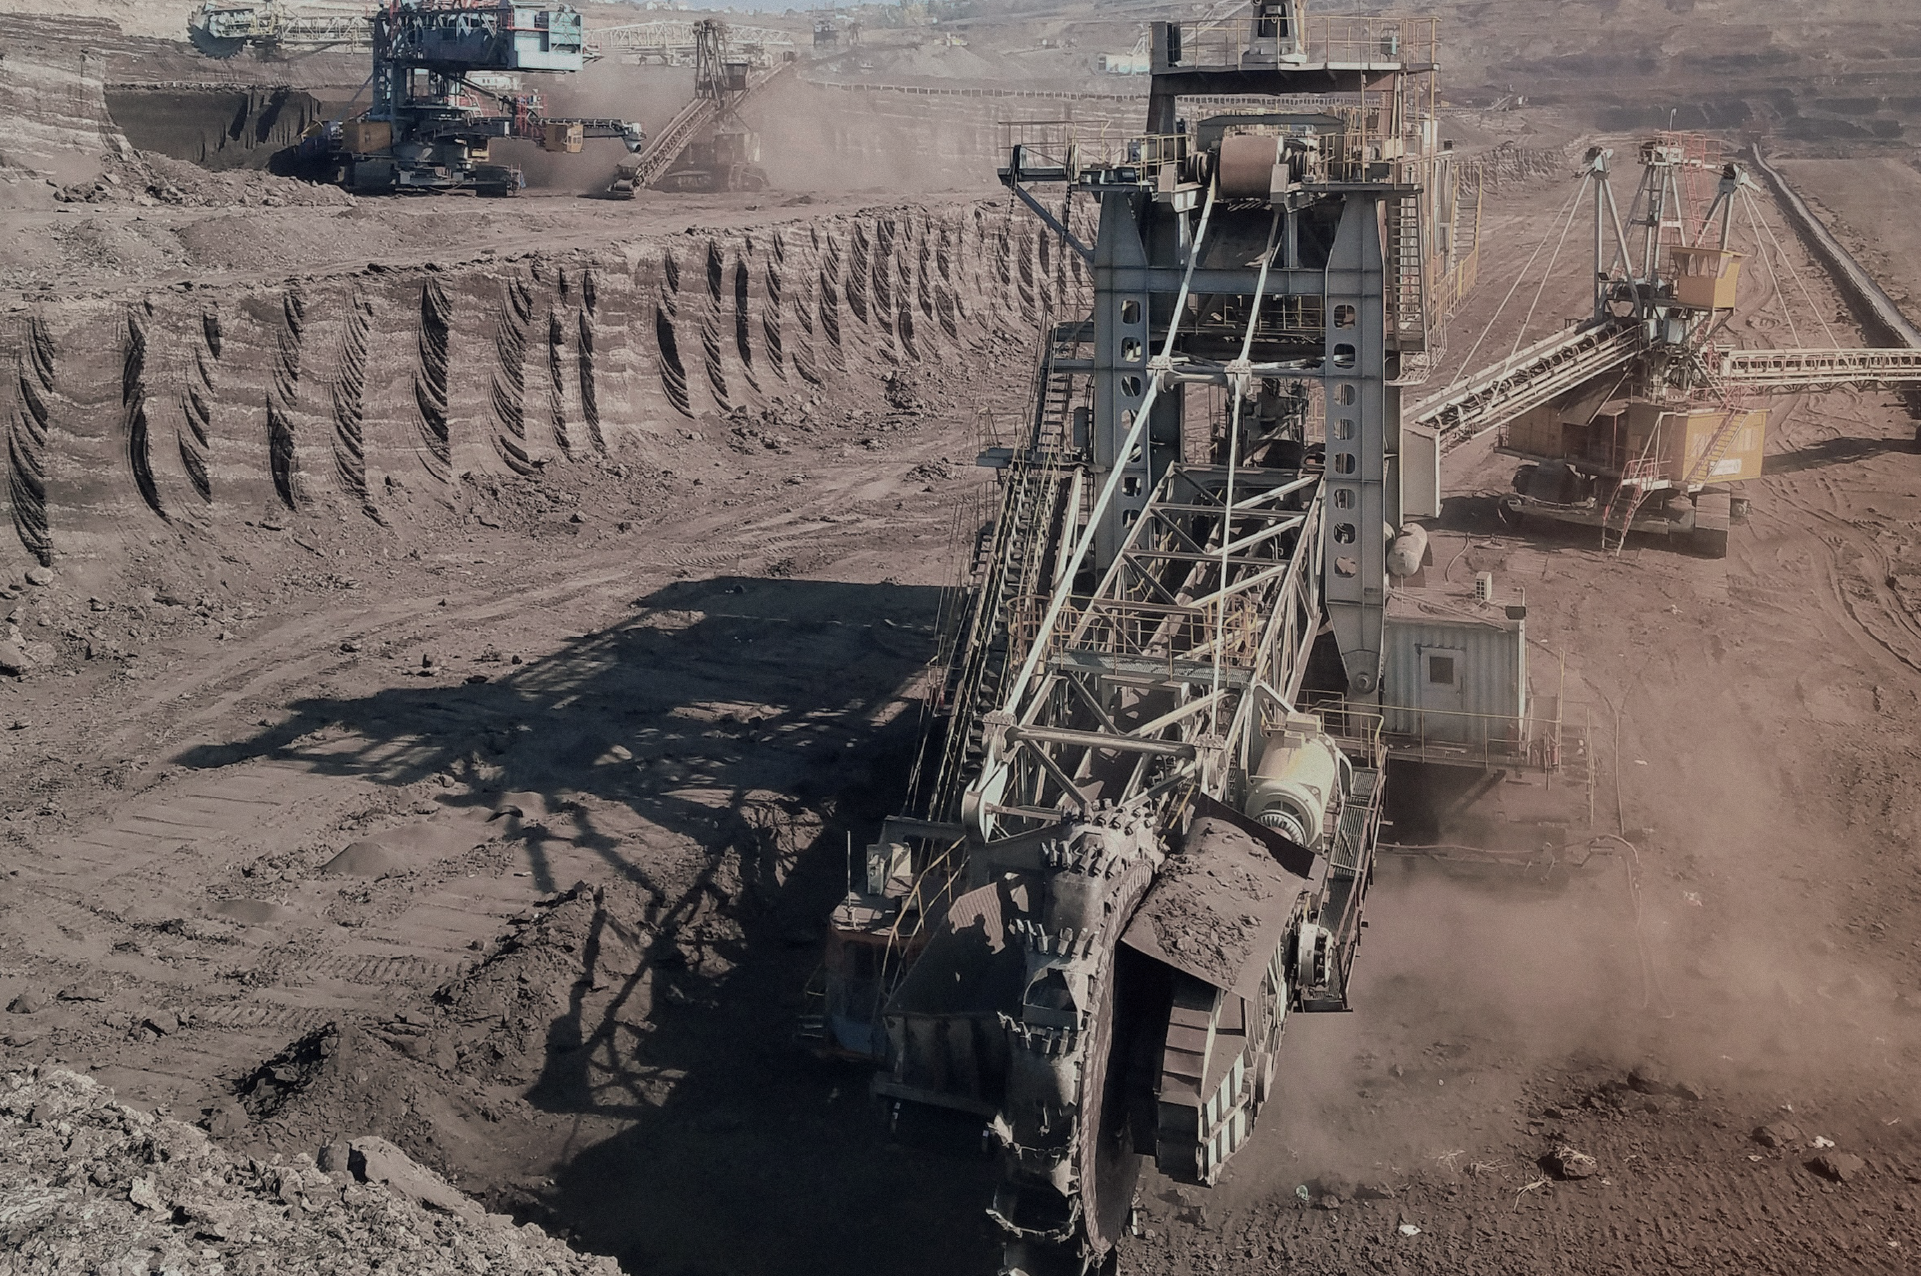 A mining rid to extract minerals from the ground.